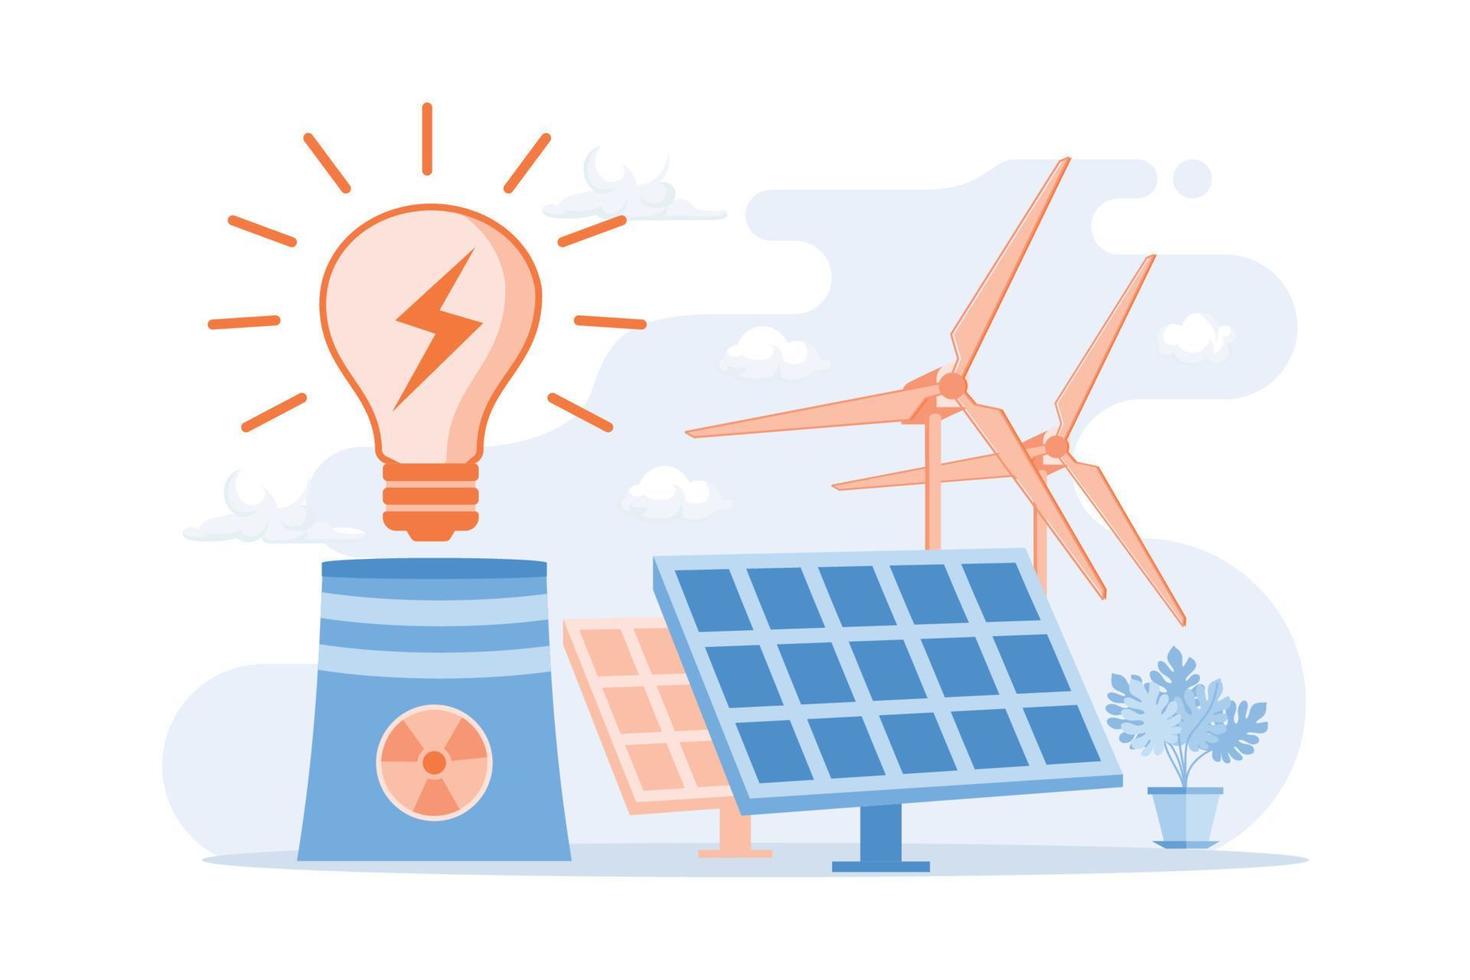 Eco friendly electricity. Wind farm, solar batteries, nuclear power plant. Sustainable energy resources  vector illustration